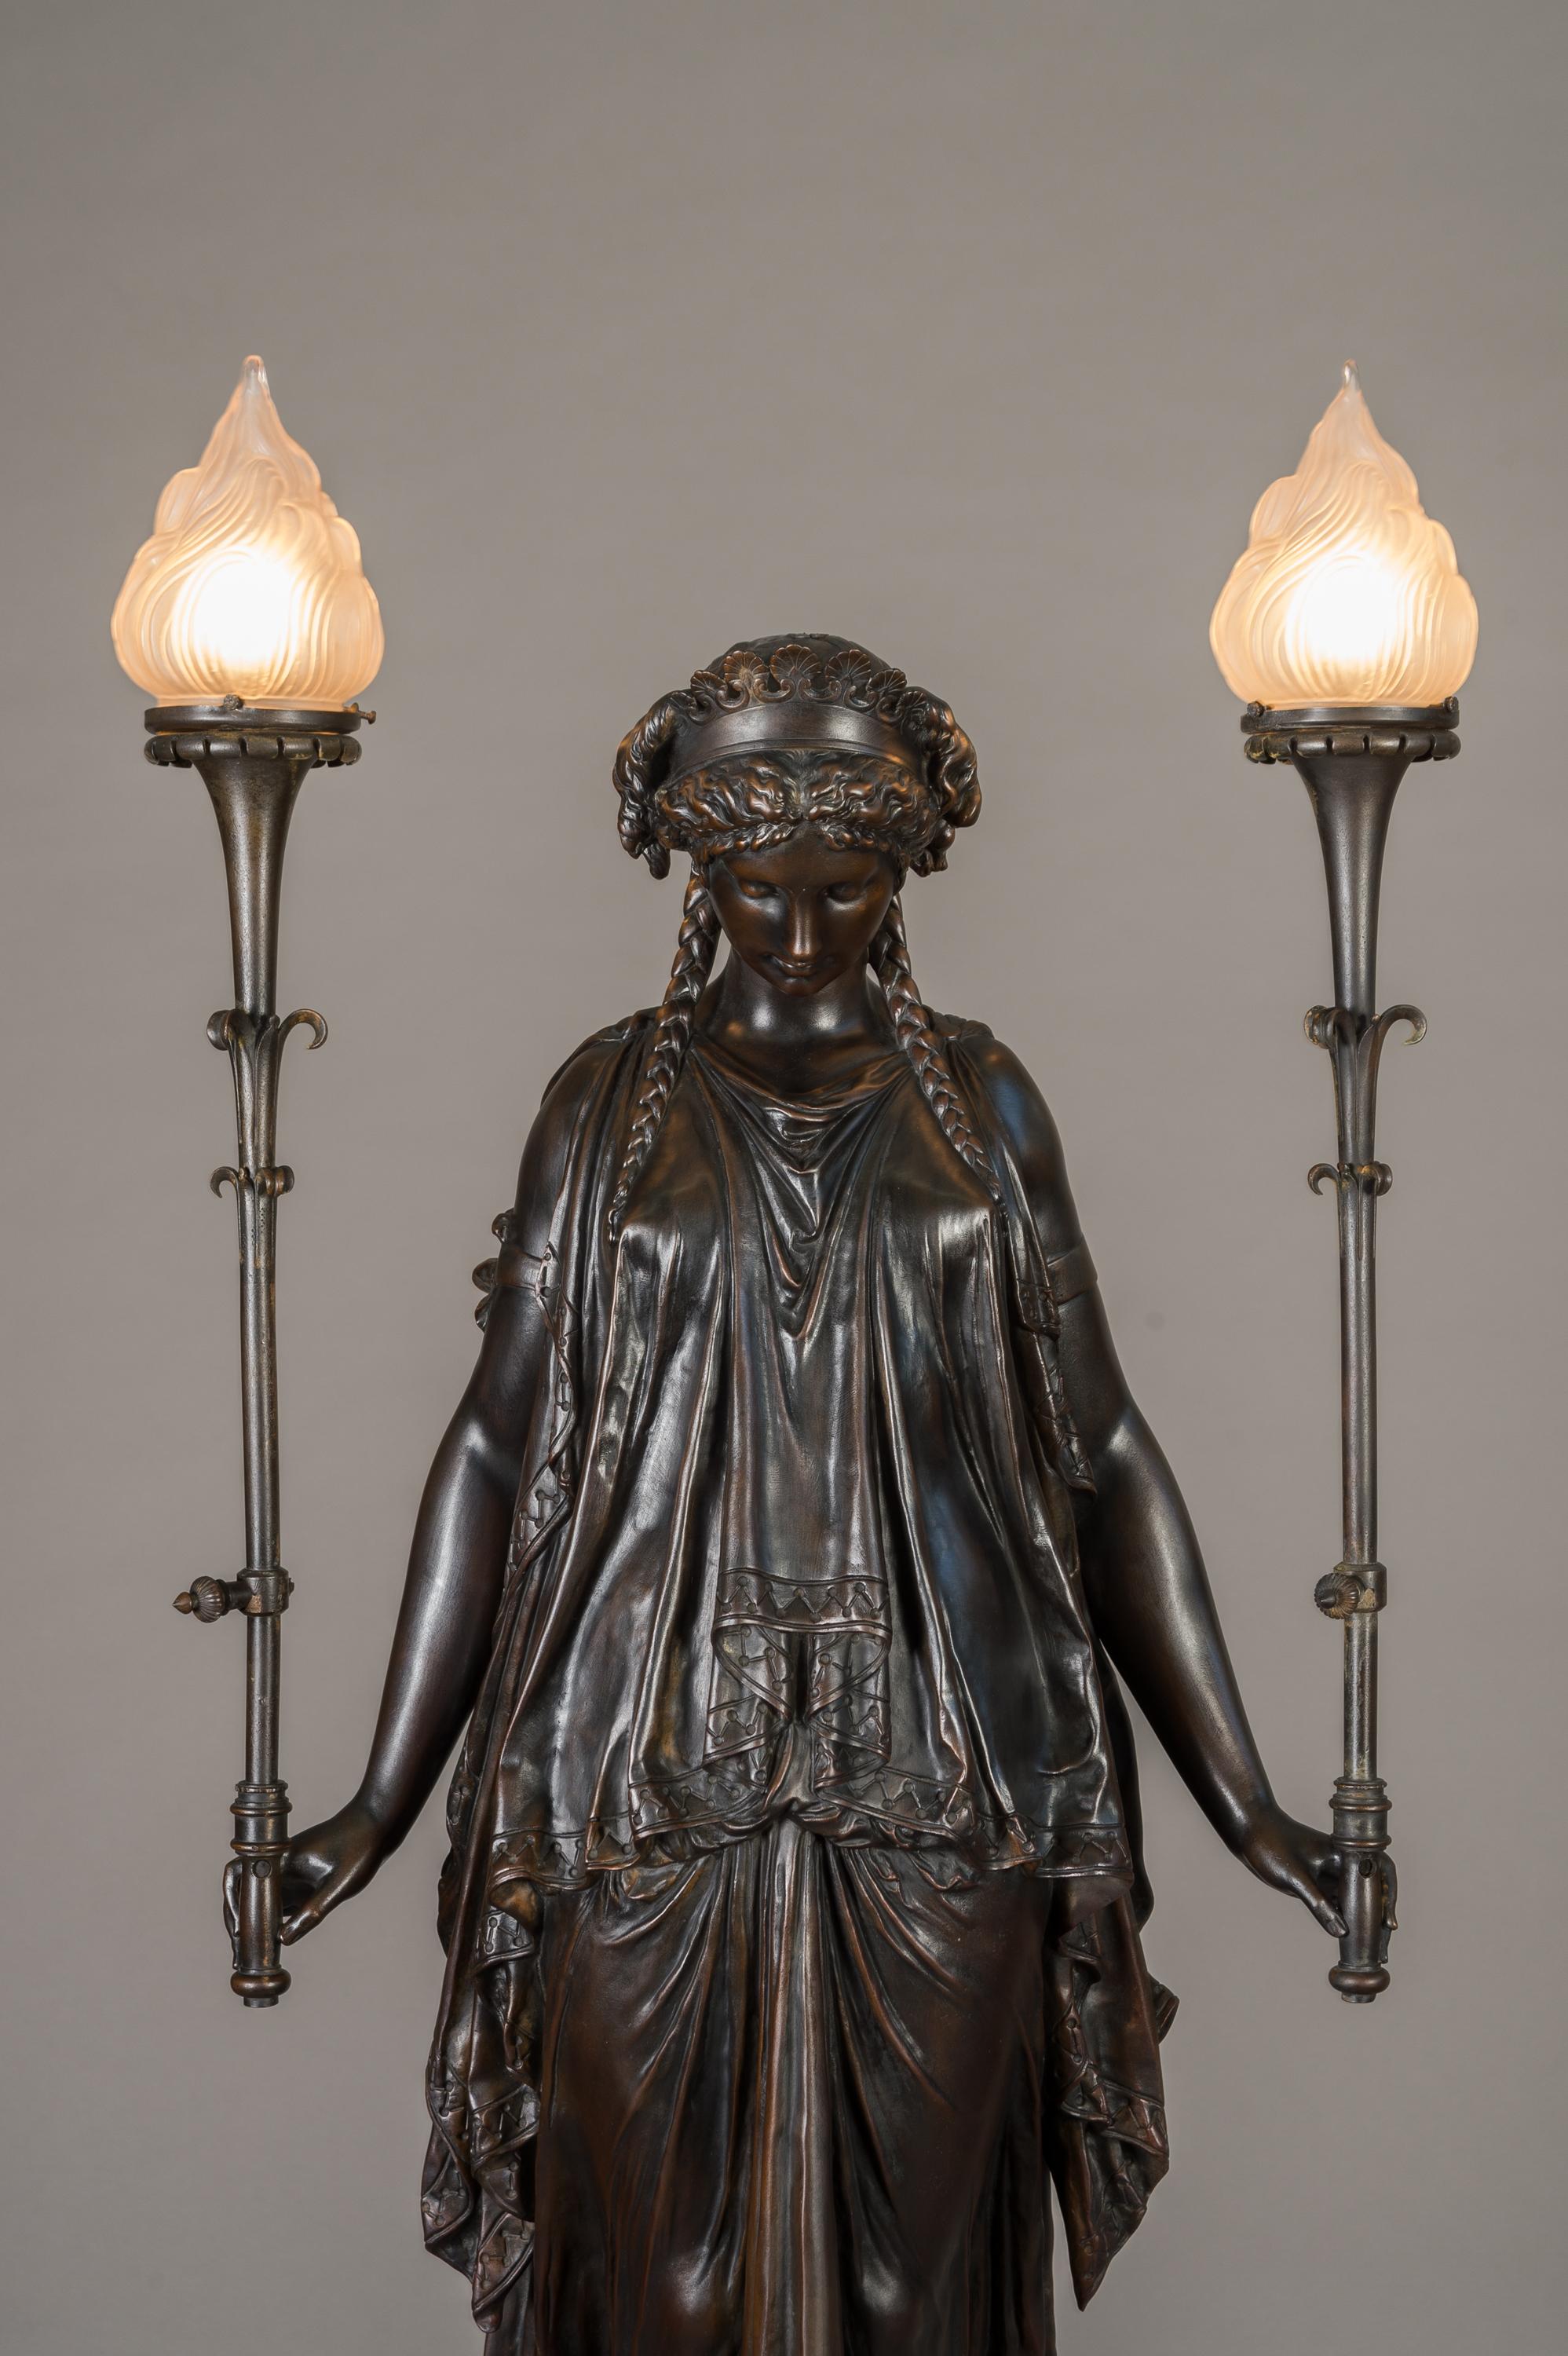 A lifesize 19th century French patinated bronze figural torchere or floorlamp

France, circa 1870

Having a wonderful dark patina depicting a fully dressed classical maiden holding two lamps. Standing on a gilt bronze ball attached to an iron